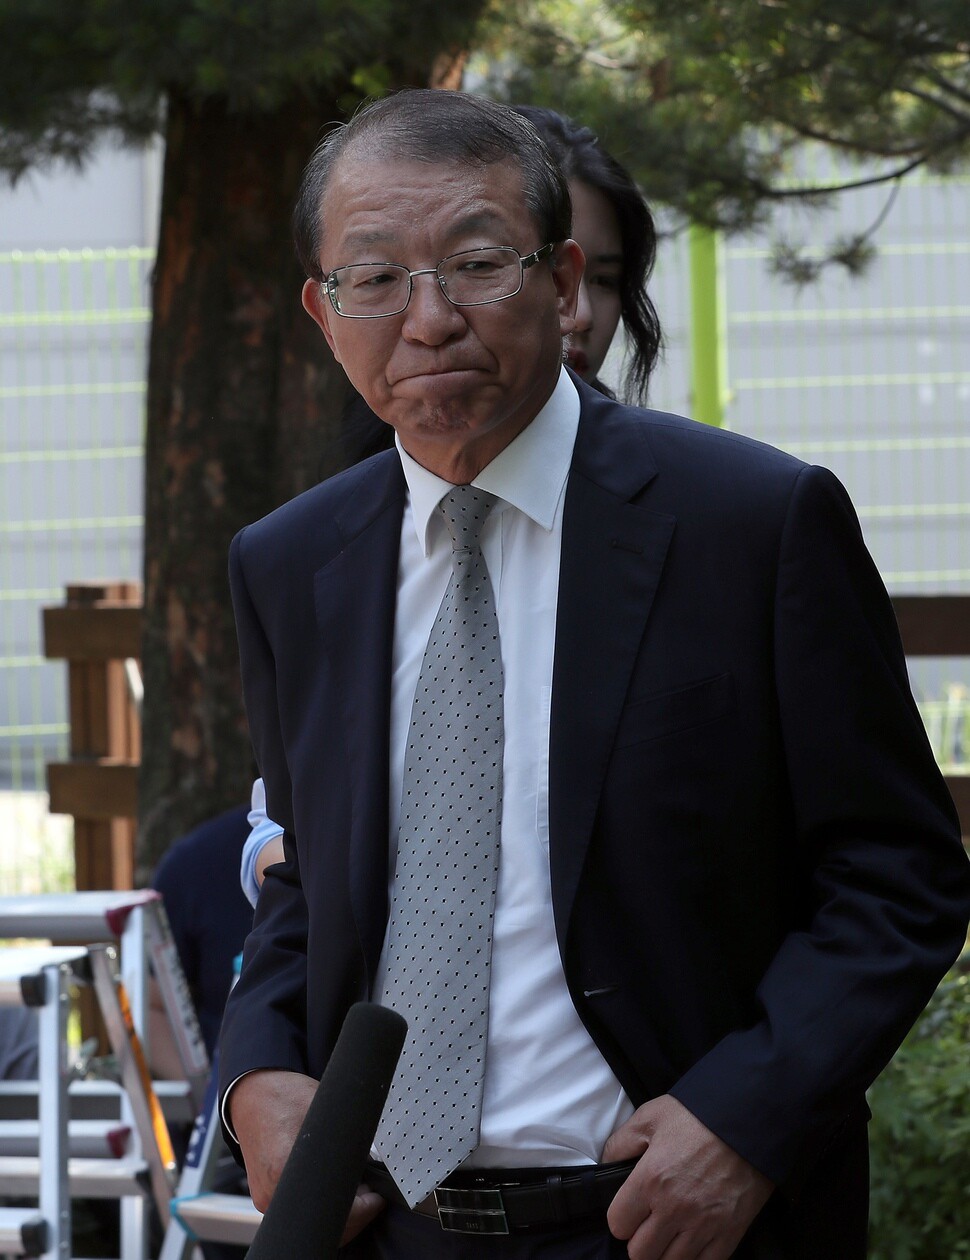 Former chief justice of South Korea’s Supreme Court Yang Sung-tae answers questions regarding judicial misconduct and political favoritism during his term on June 1 in Seongnam